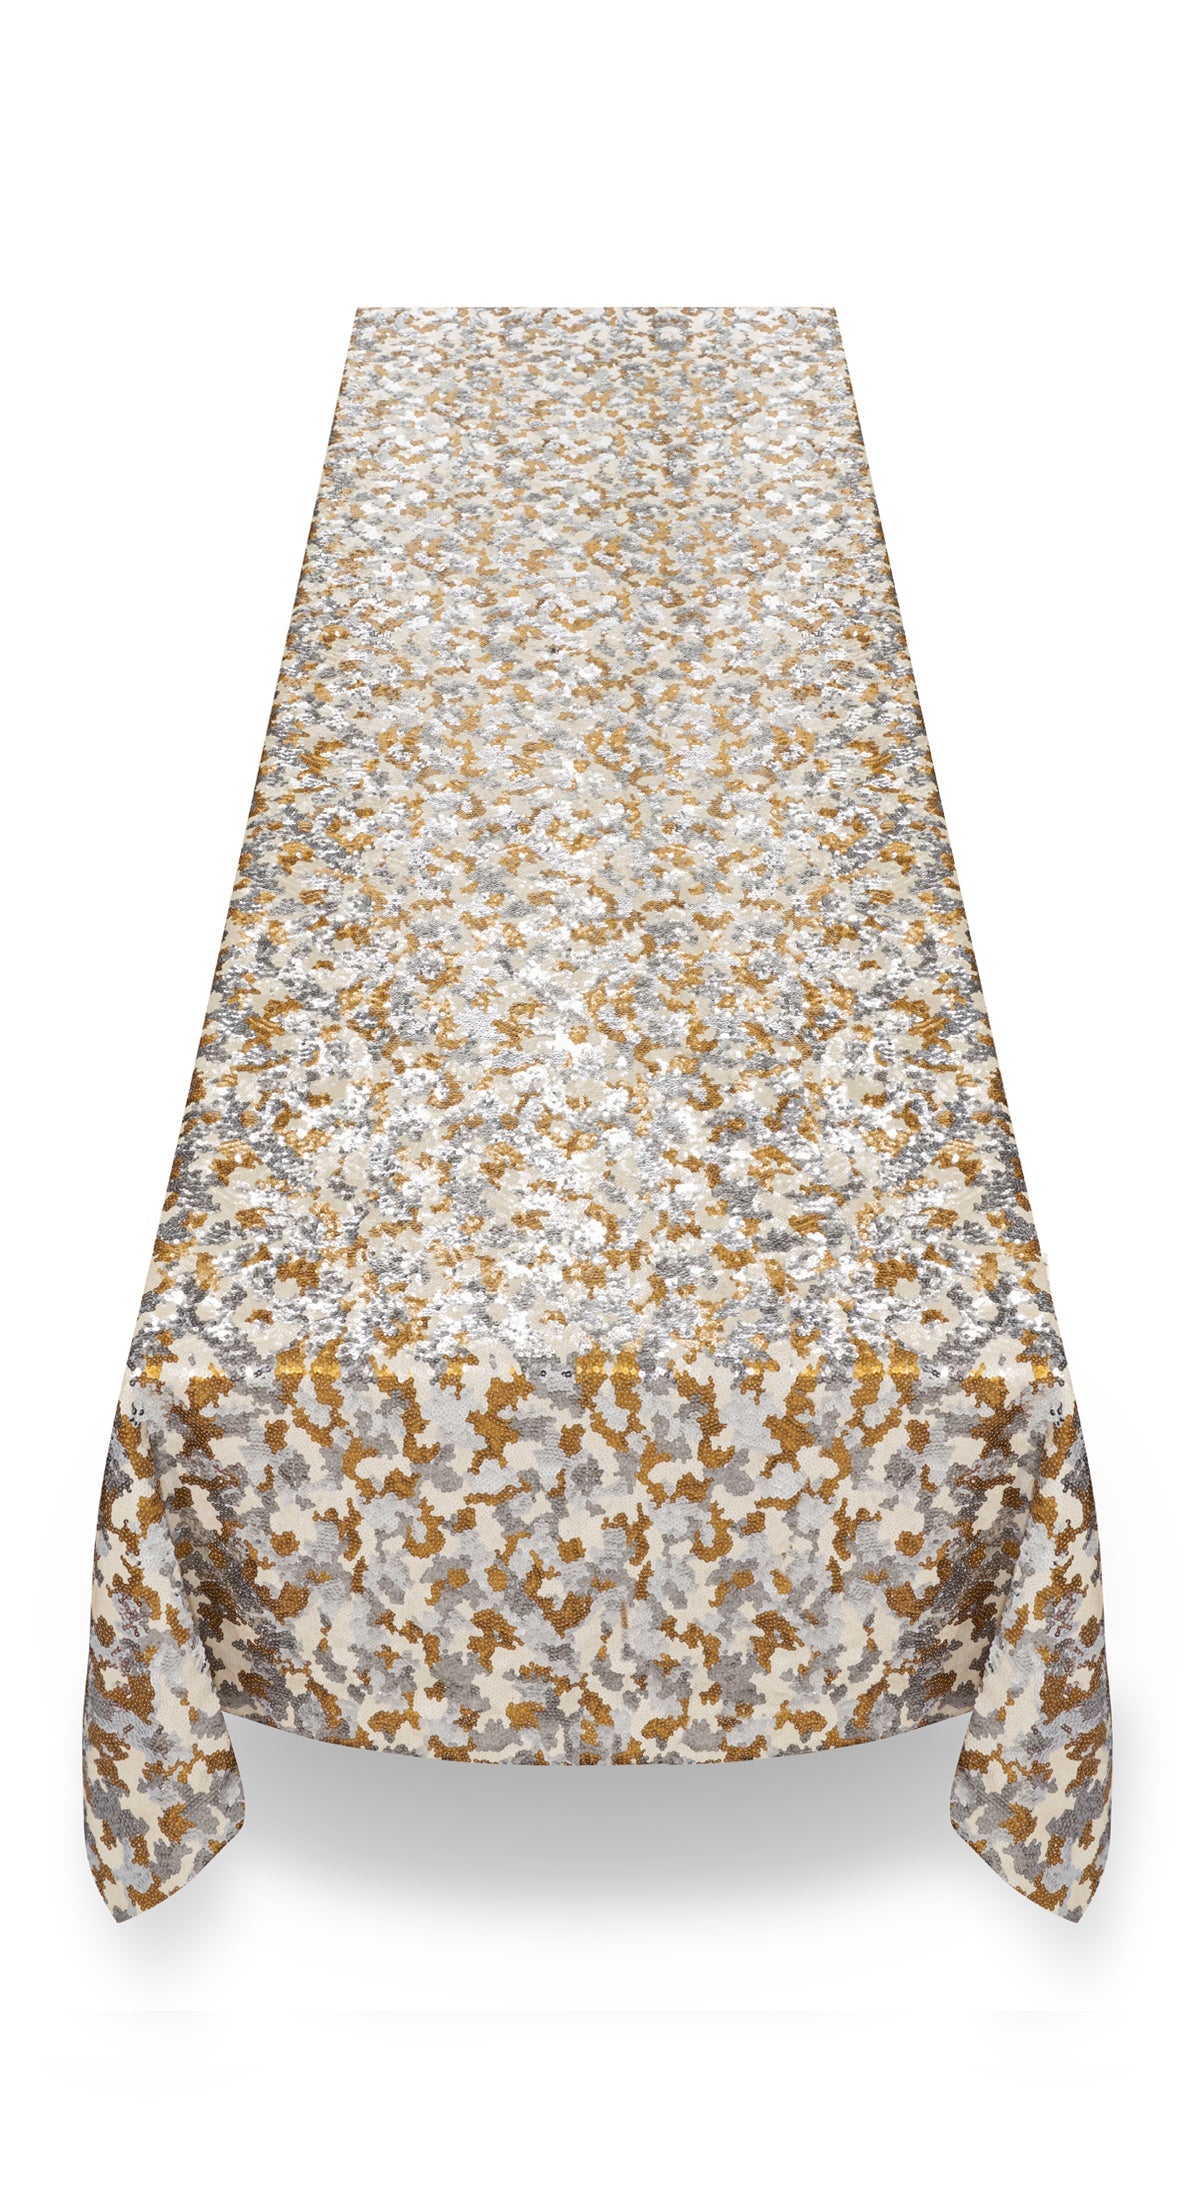 S&B Couture: 'London Plane' Sequin Table Gown in Gold, Silver and White